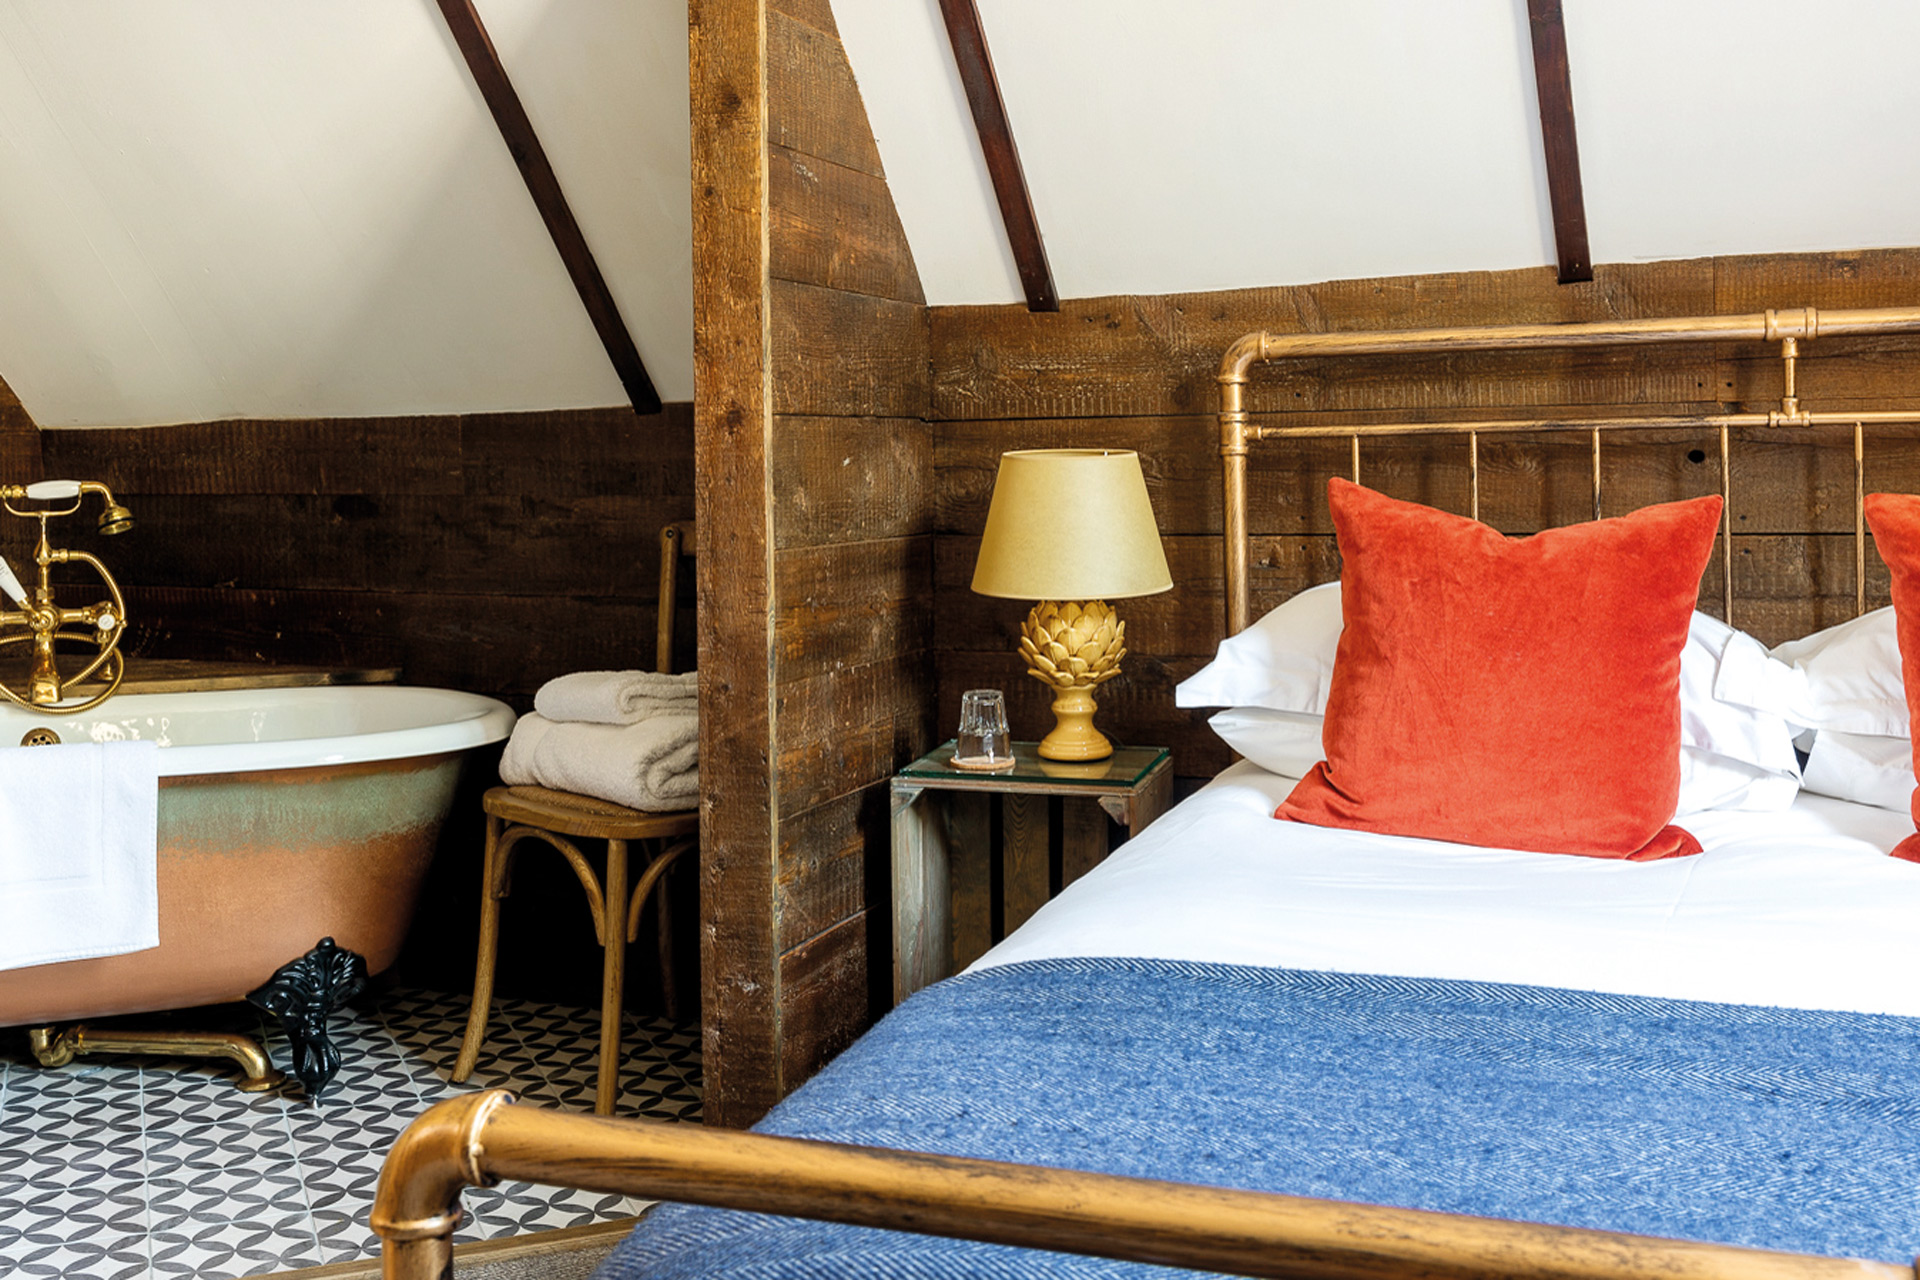 Bedroom at Tudor Farmhouse Hotel with a copper freestanding bath and blue and red accents.